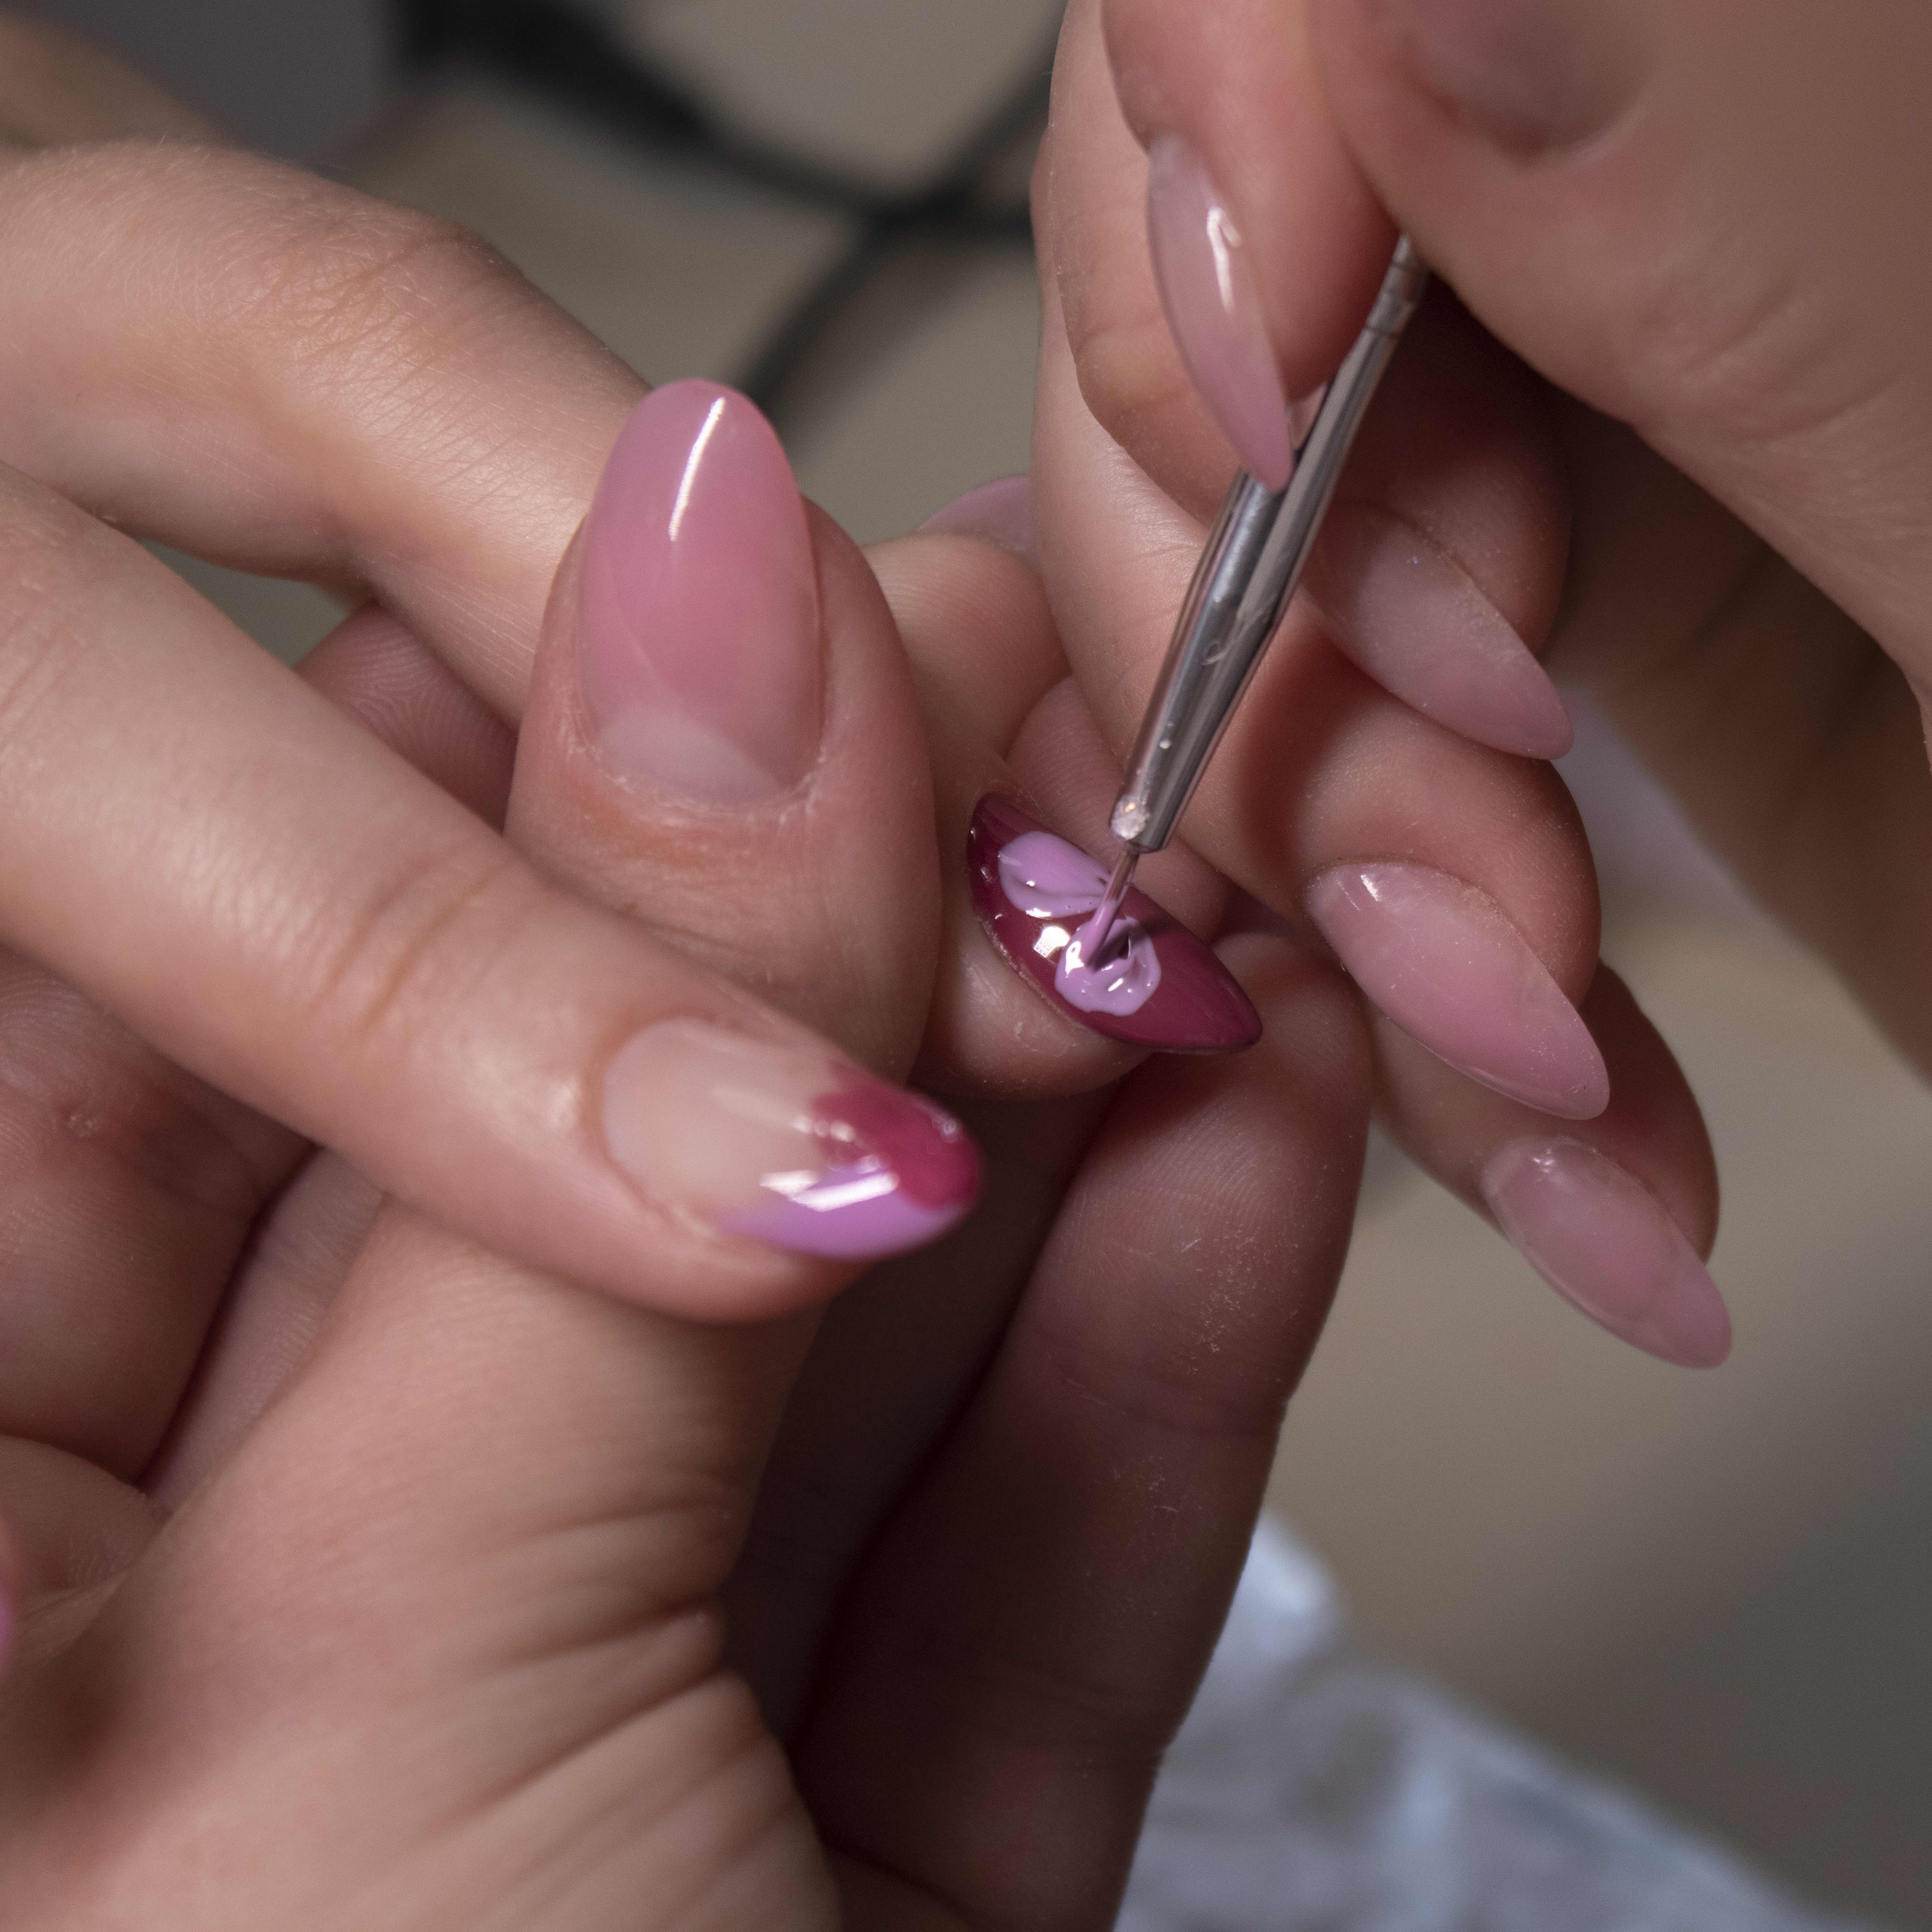 Gel Manicure + Return Soak-Off + Classic / Gel Pedicure for 1 Person (2 Sessions) at Qoosh Nail Spa - Get Deals, Cashback and Rewards with ShopBack GO